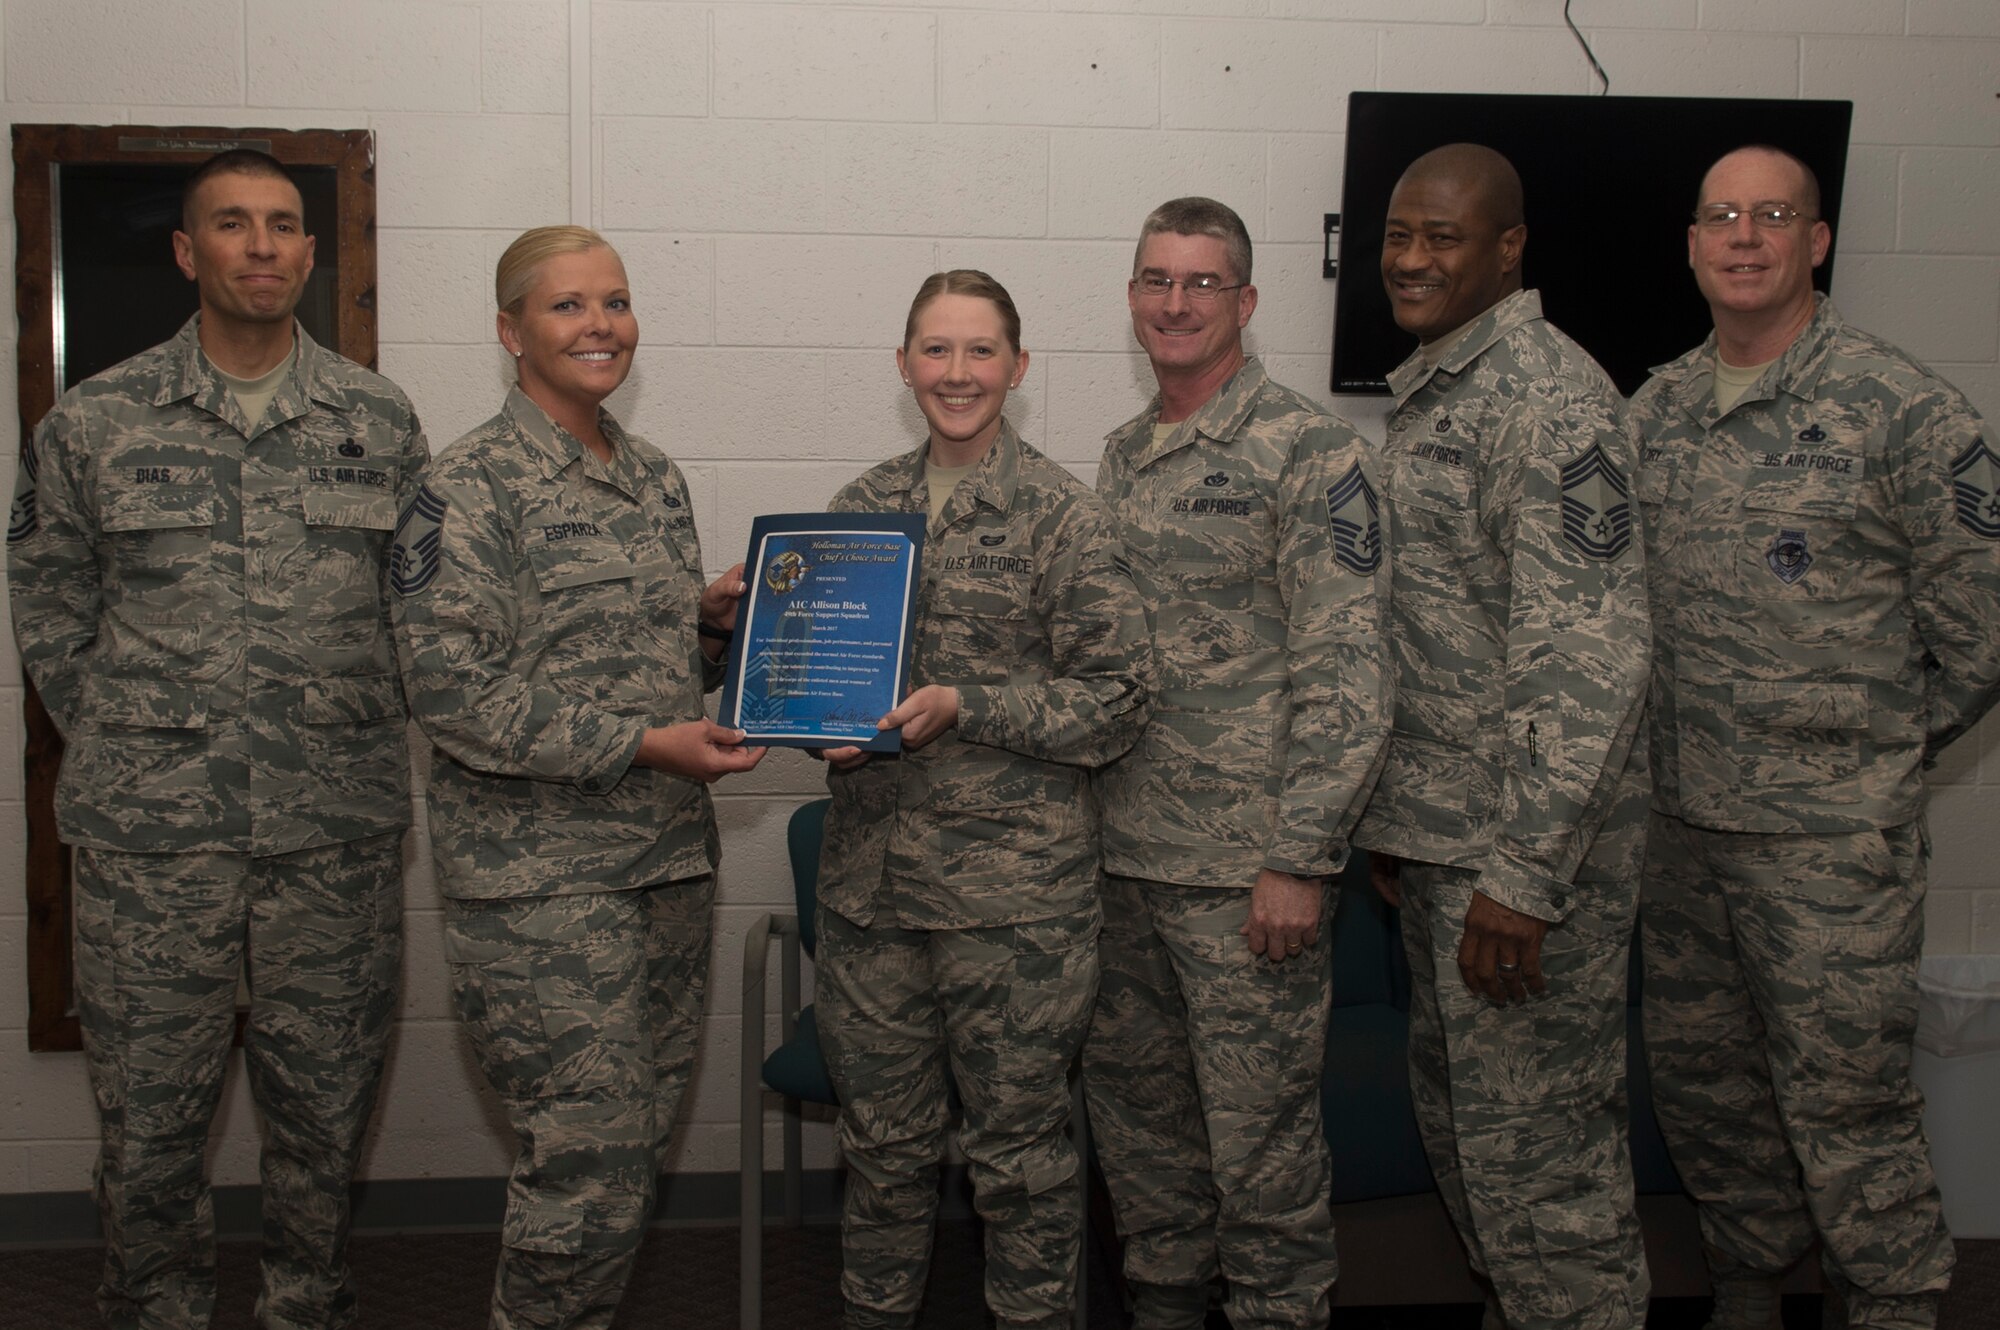 Airmen 1st Class Allison S. Block, a 49th Force Support Squadron career development apprentice, receives the March Chief’s Choice Award, from Chief Master Sergeant Sarah Esparza, the 49th FSS superintendent, April 10, 2017, at Holloman Air Force Base, N.M. (U.S. Air Force photo by Tech. Sgt. Amanda Junk)